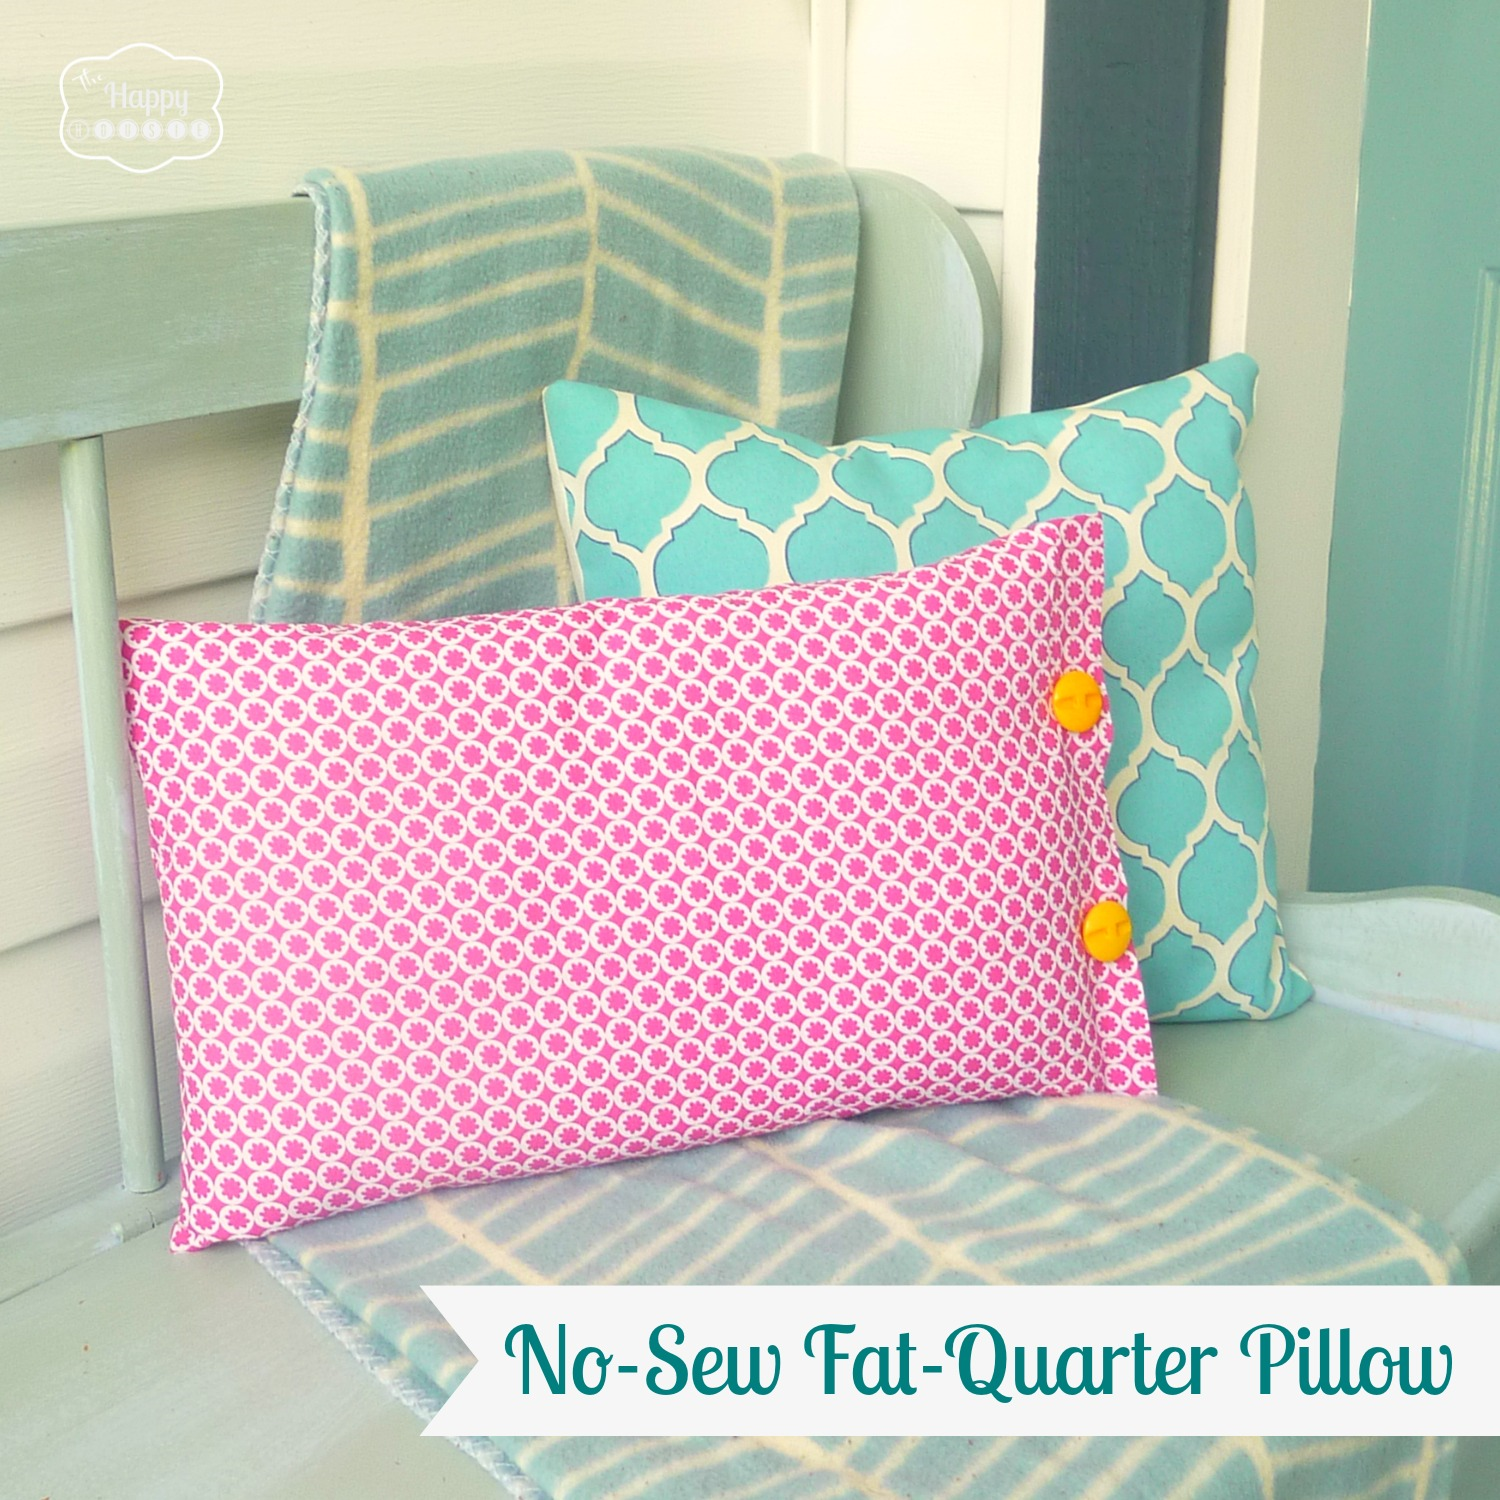 A Quick’n’Easy No-Sew Fat-Quarter Pillow and Our Pink Lemonade Inspired Front Porch